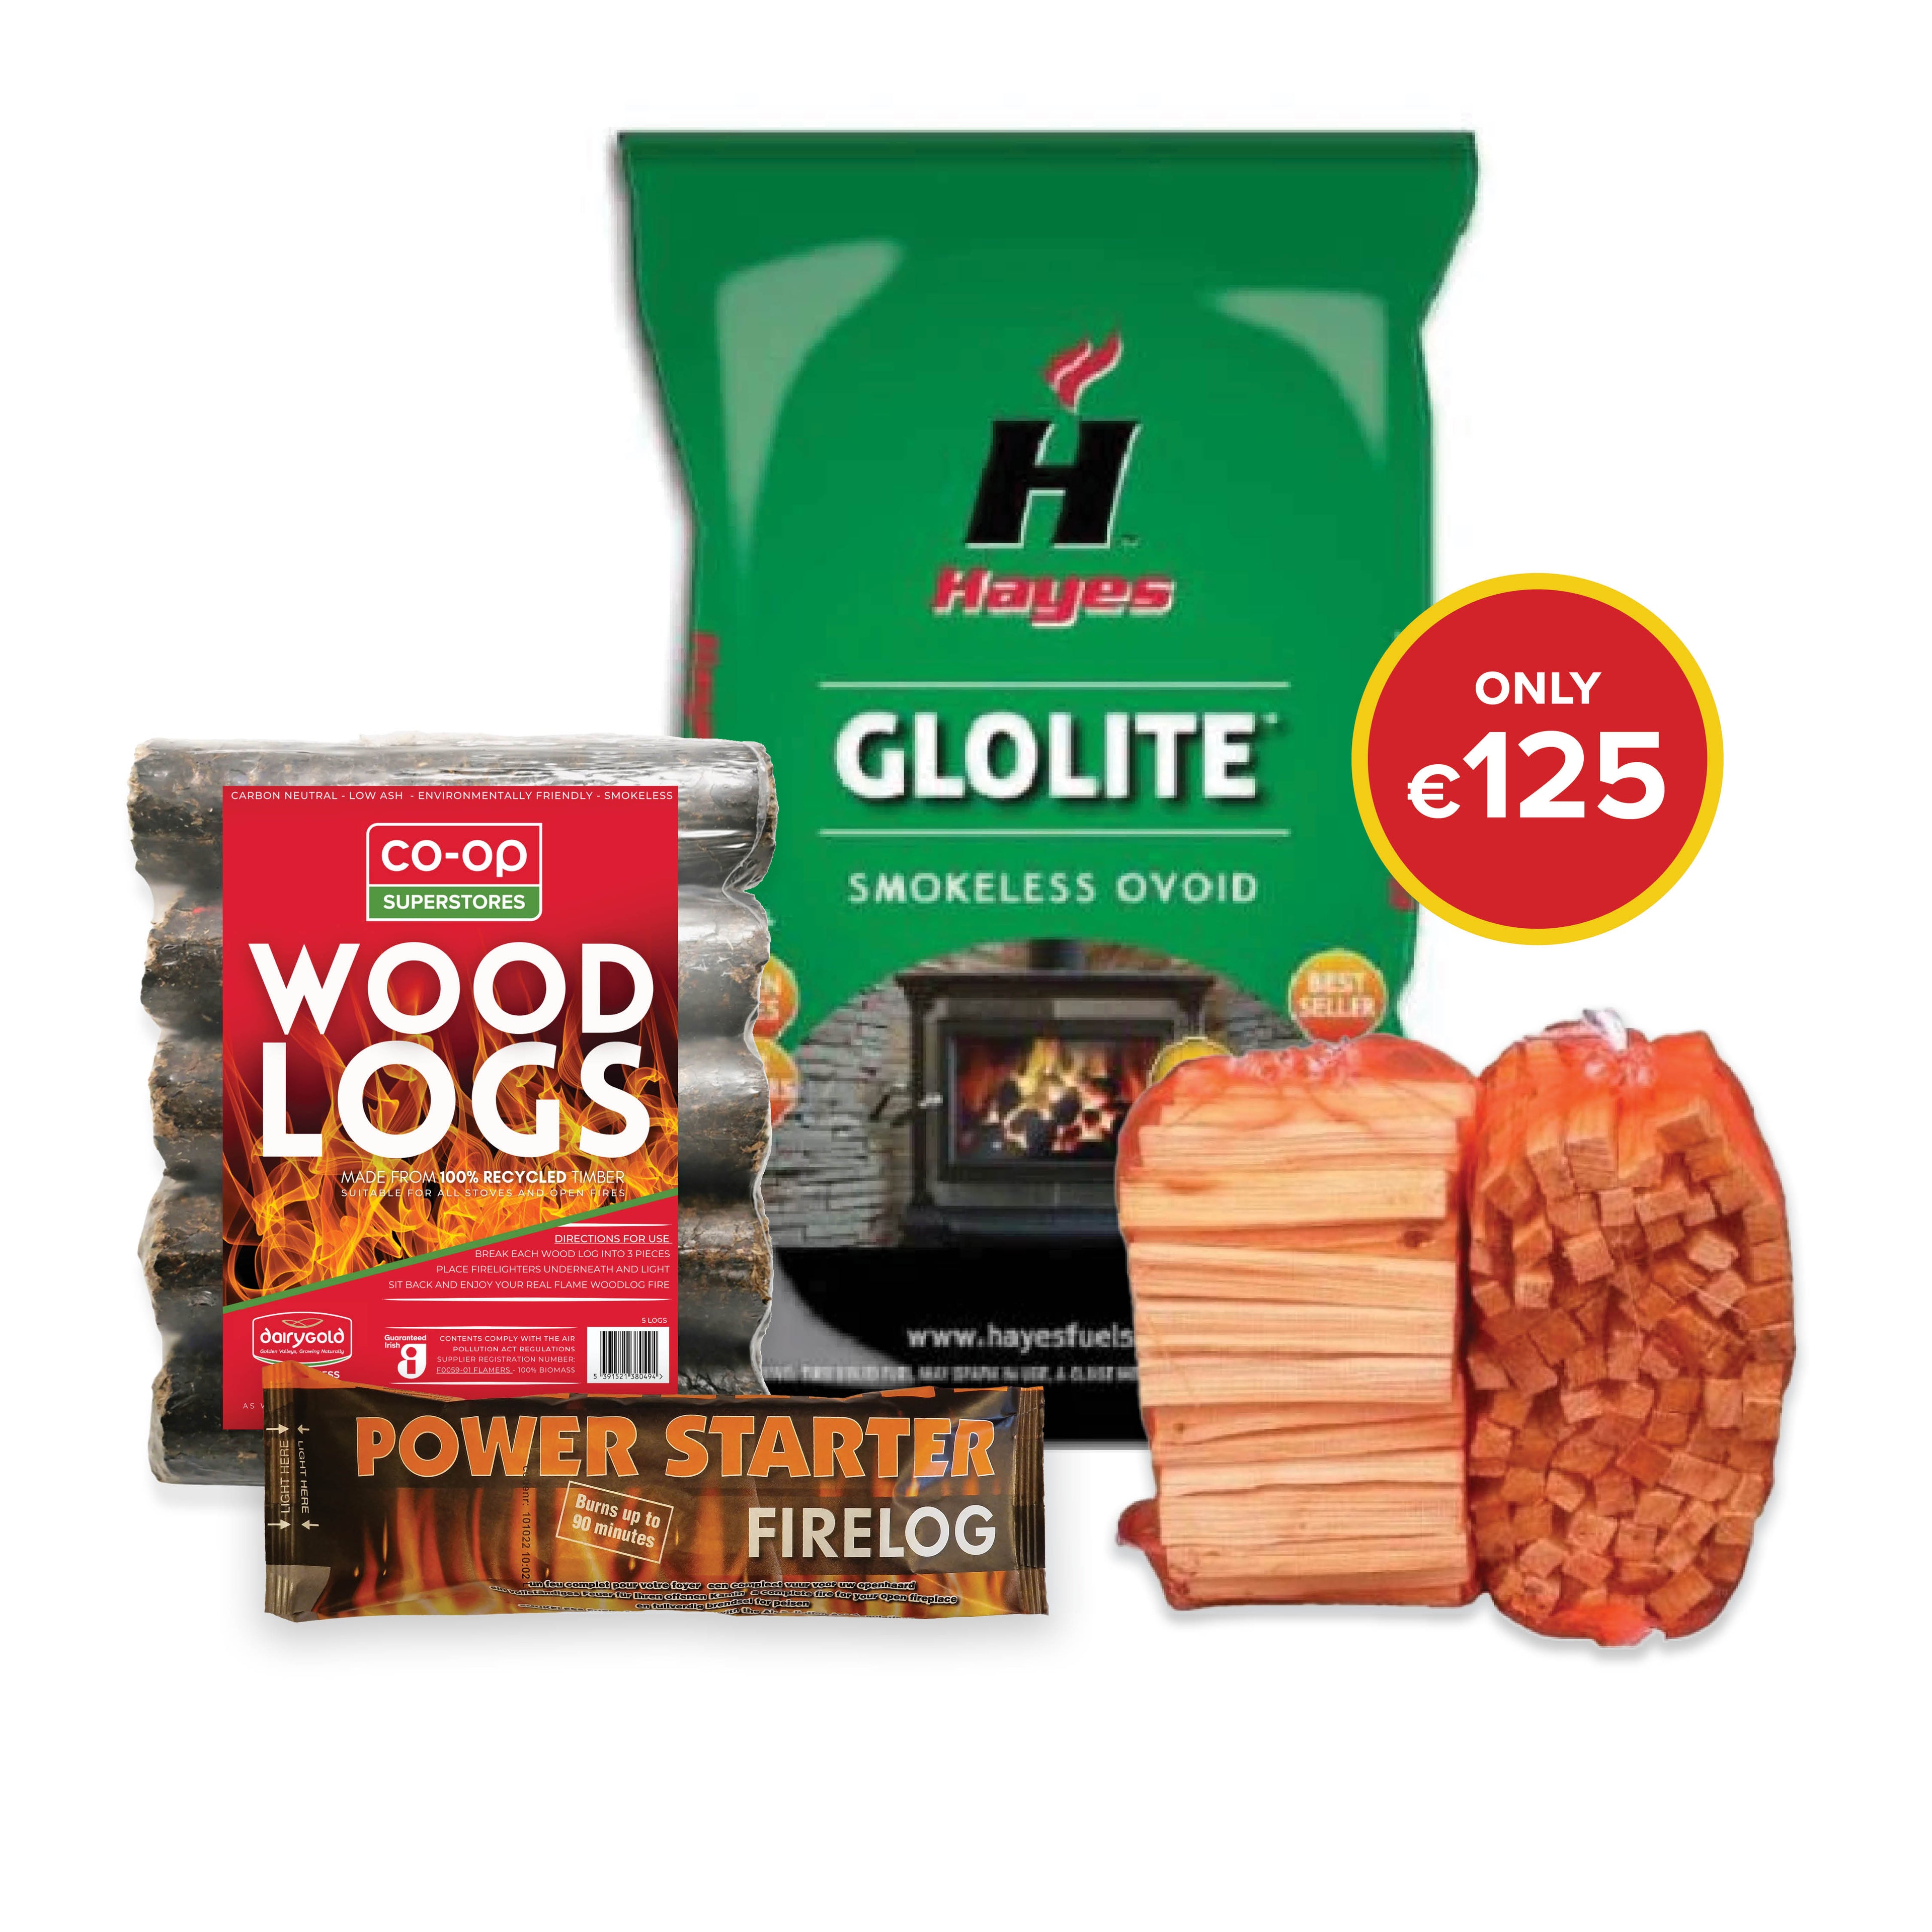 Buy 3 bag Glolite 40kg, 10 Firelogs, 3 bags of Kindling and 3 bale of Woods logs 5s for €125